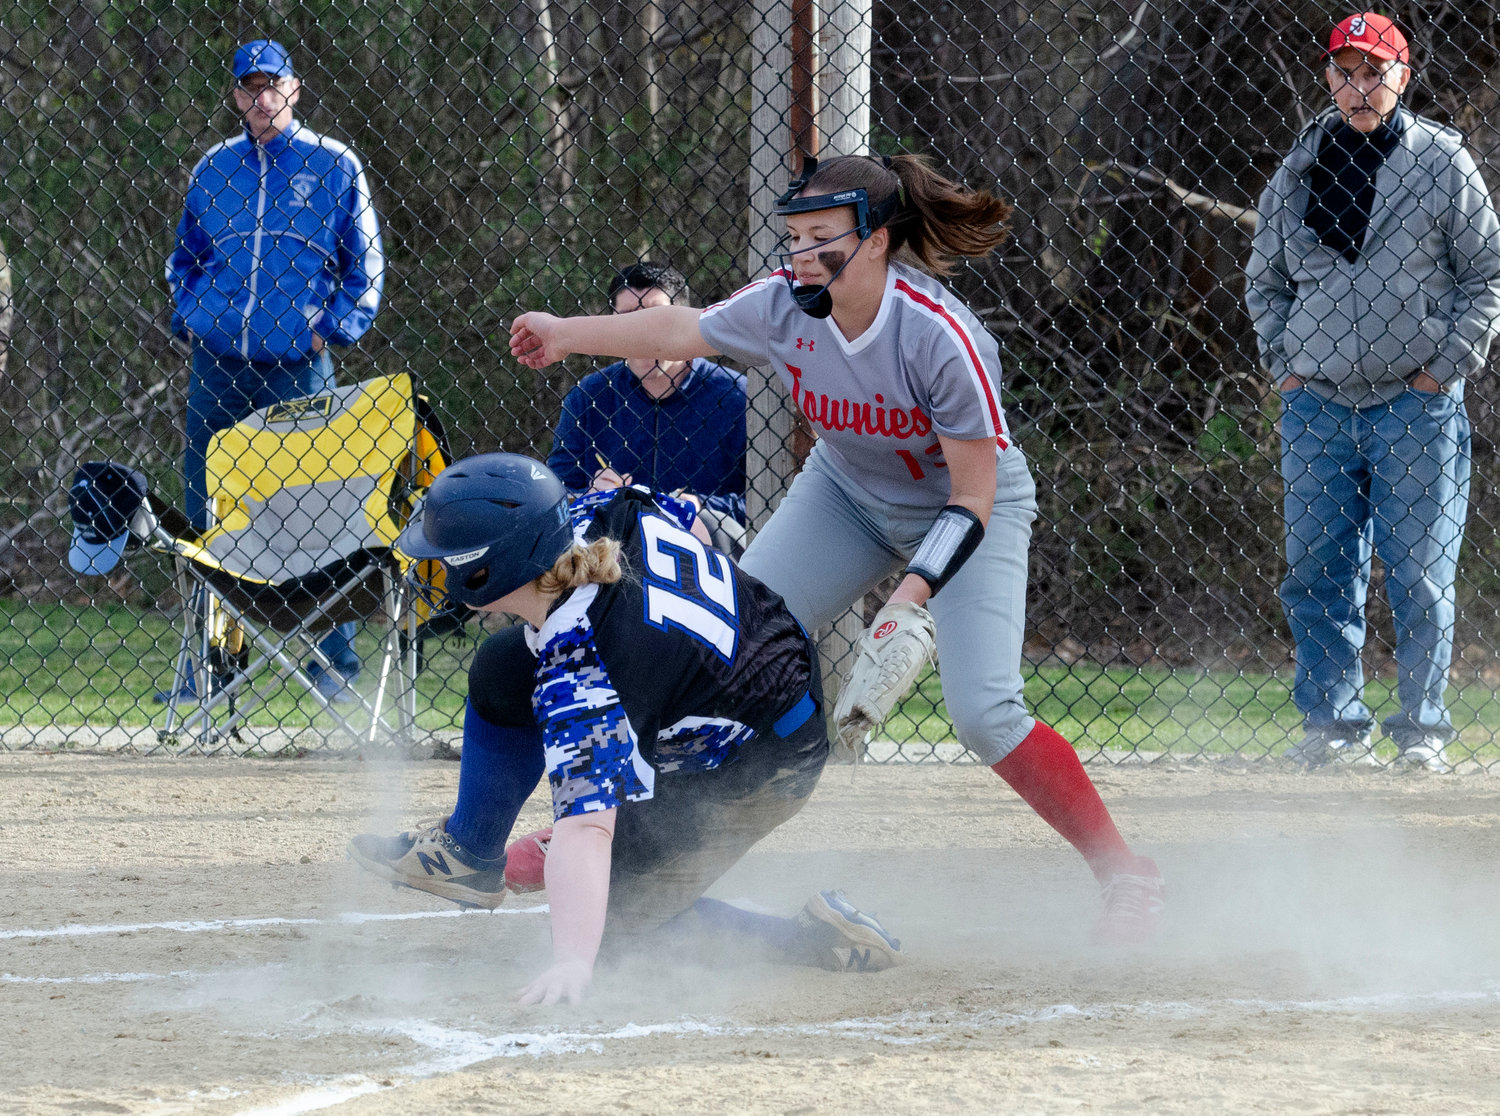 Quadros attempts to tag out a Scituate runner at home.